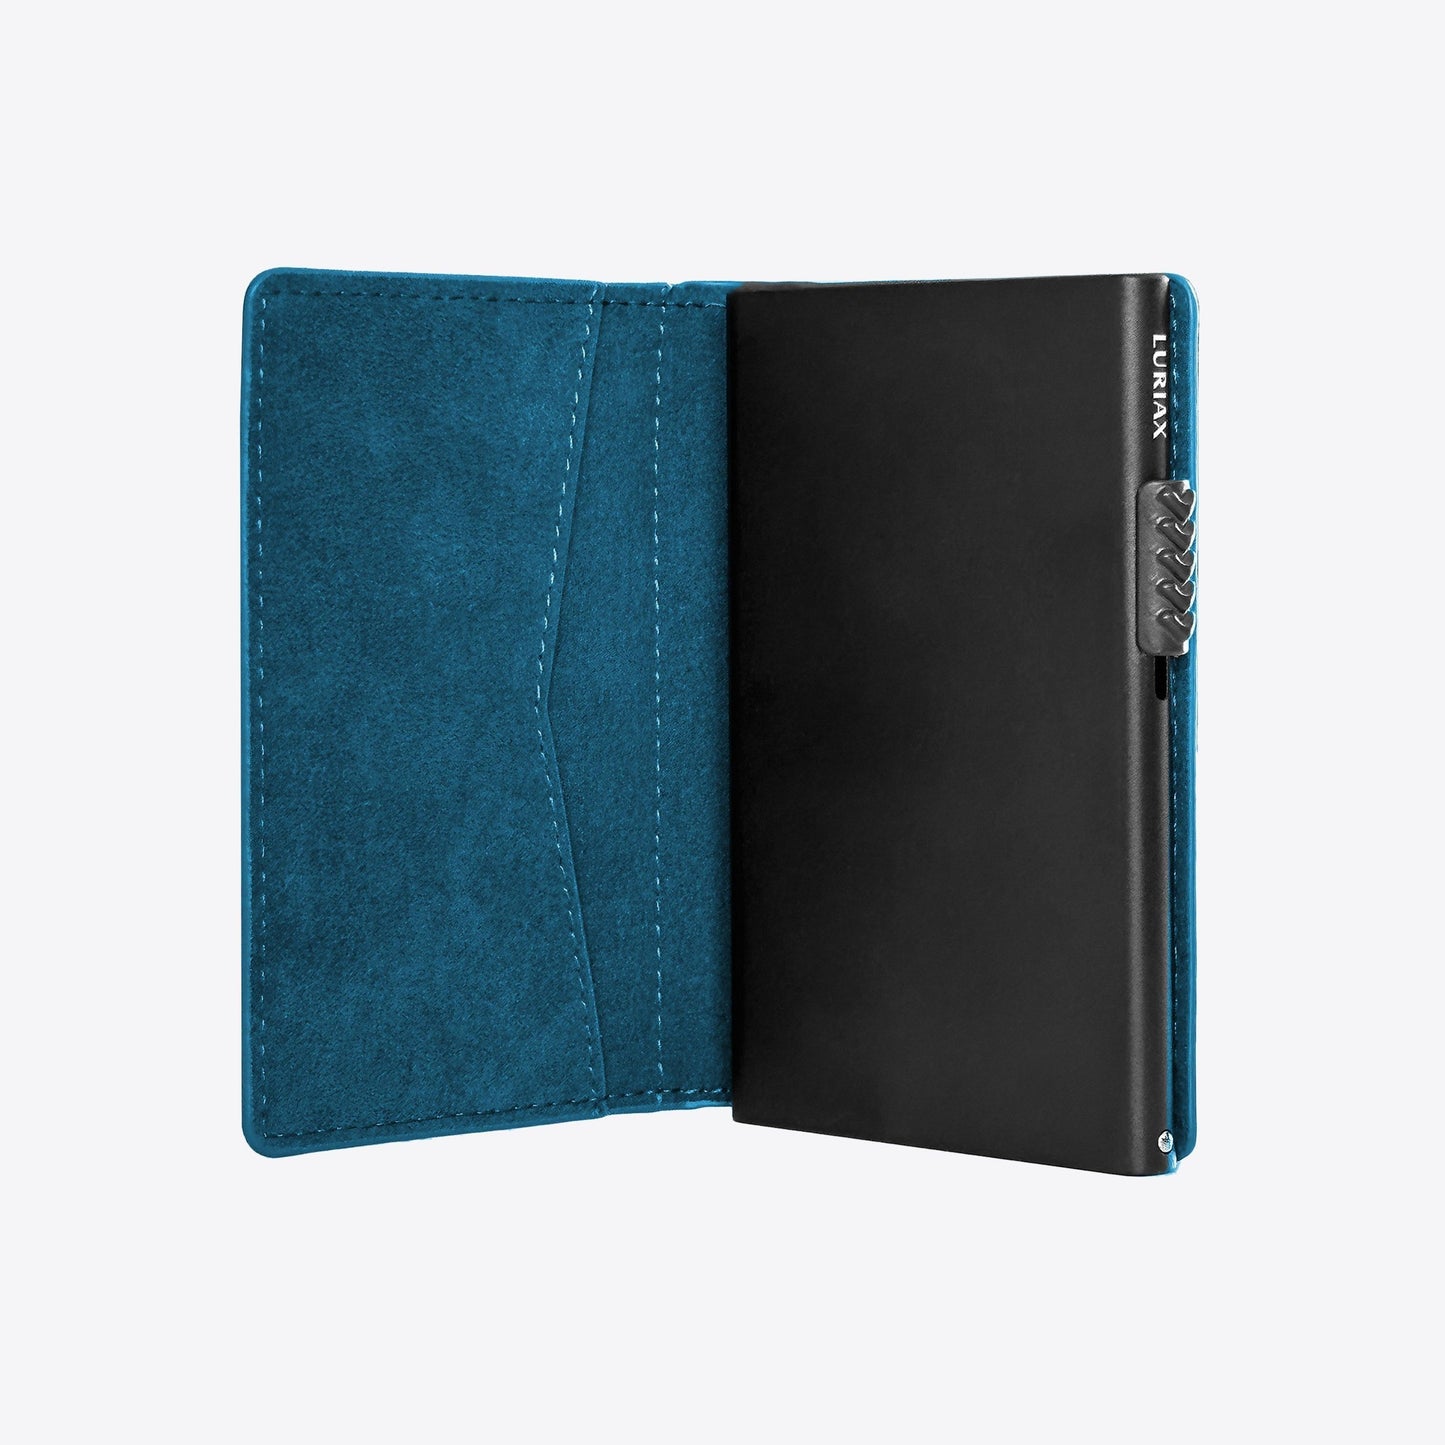 Alcantara Suede Leather iPhone Case and Accessories Collection - The Bifold Cardholder - Prussian Blue - Luriax